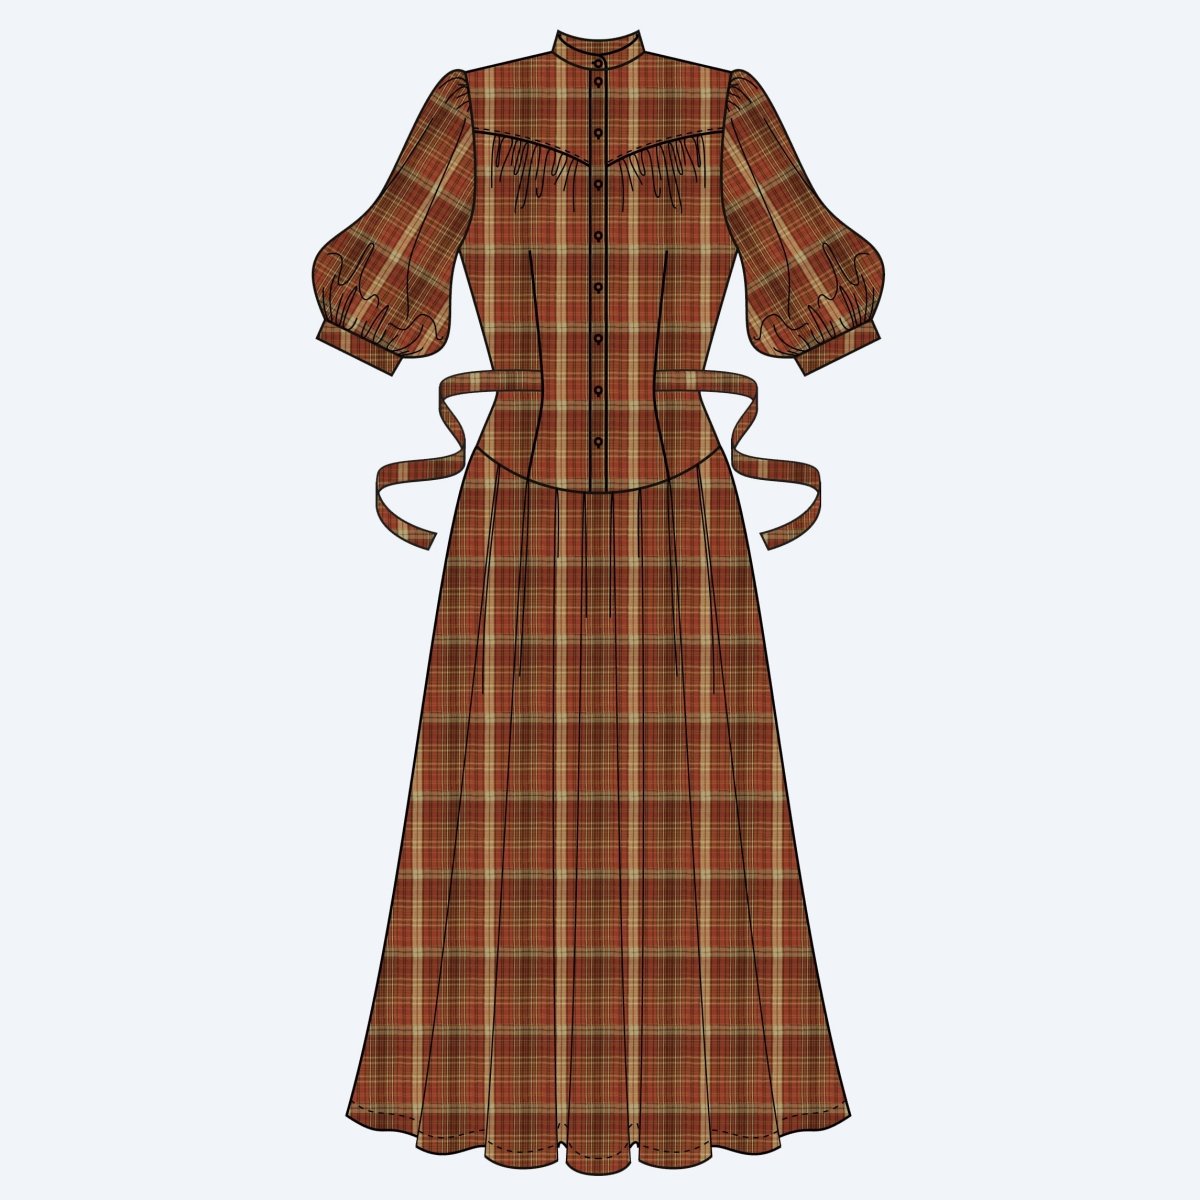 Coloured computer line drawing of a vintage style dress with three quarter length sleeves, yoke, button fastening, dropped waits, tie belt and Grandpa collar- The Green Gables dress by Emmy Design Sweden from Revival Retro London UK